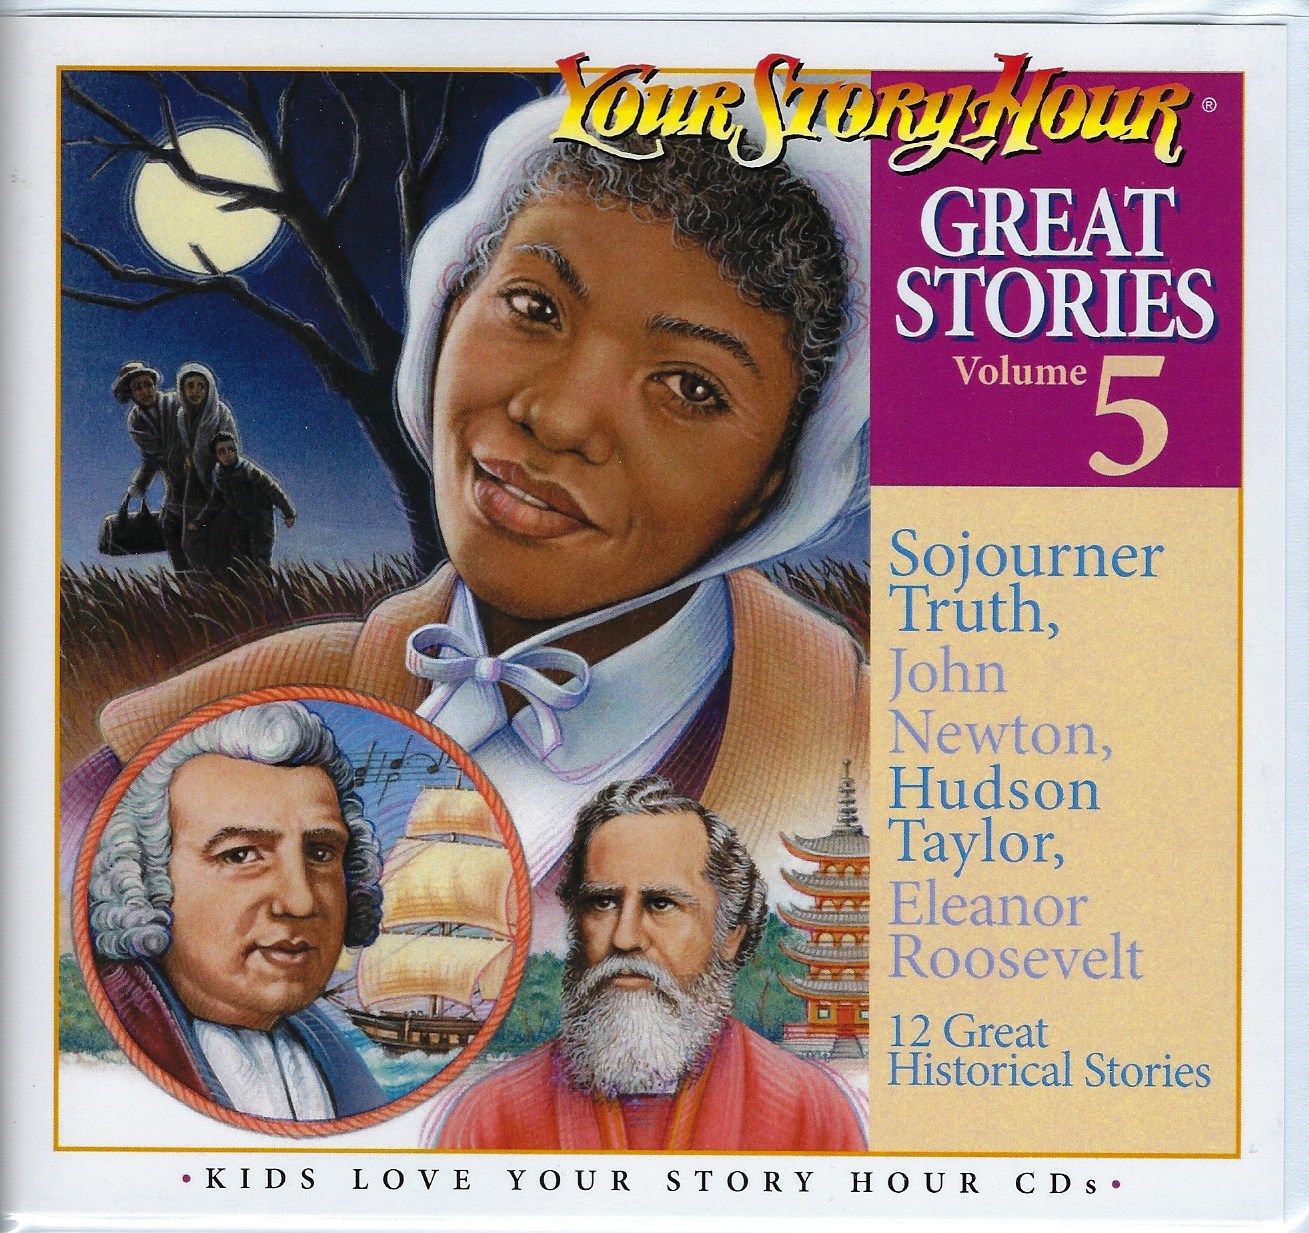 GREAT STORIES VOLUME 5 CD ALBUM Your Story Hour